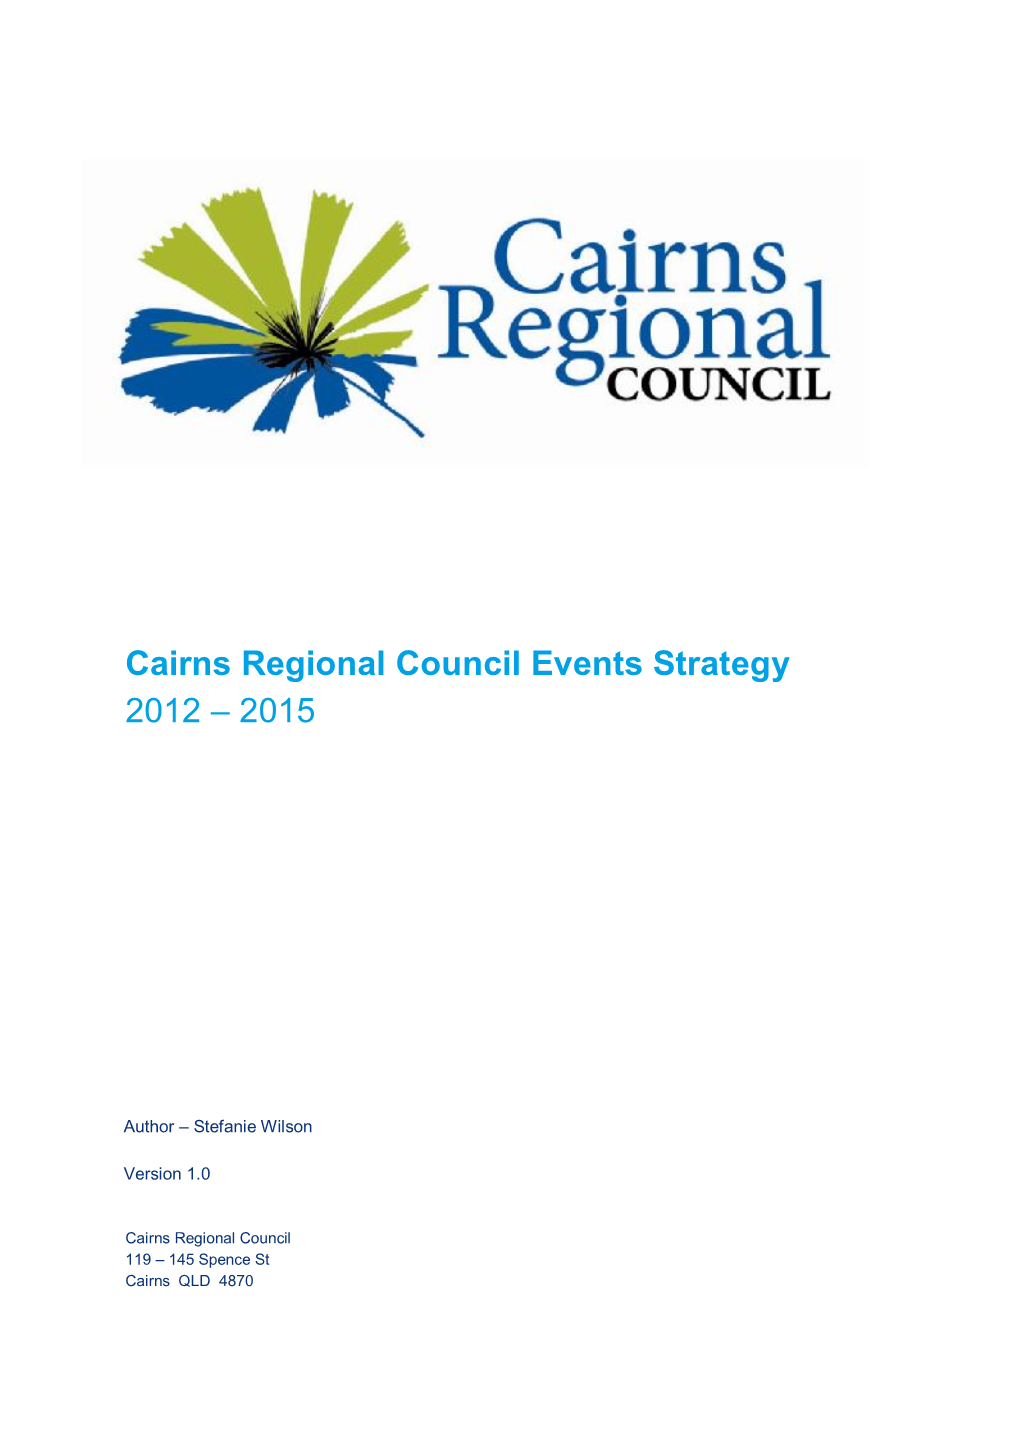 Cairns Regional Council Events Strategy 2012 – 2015